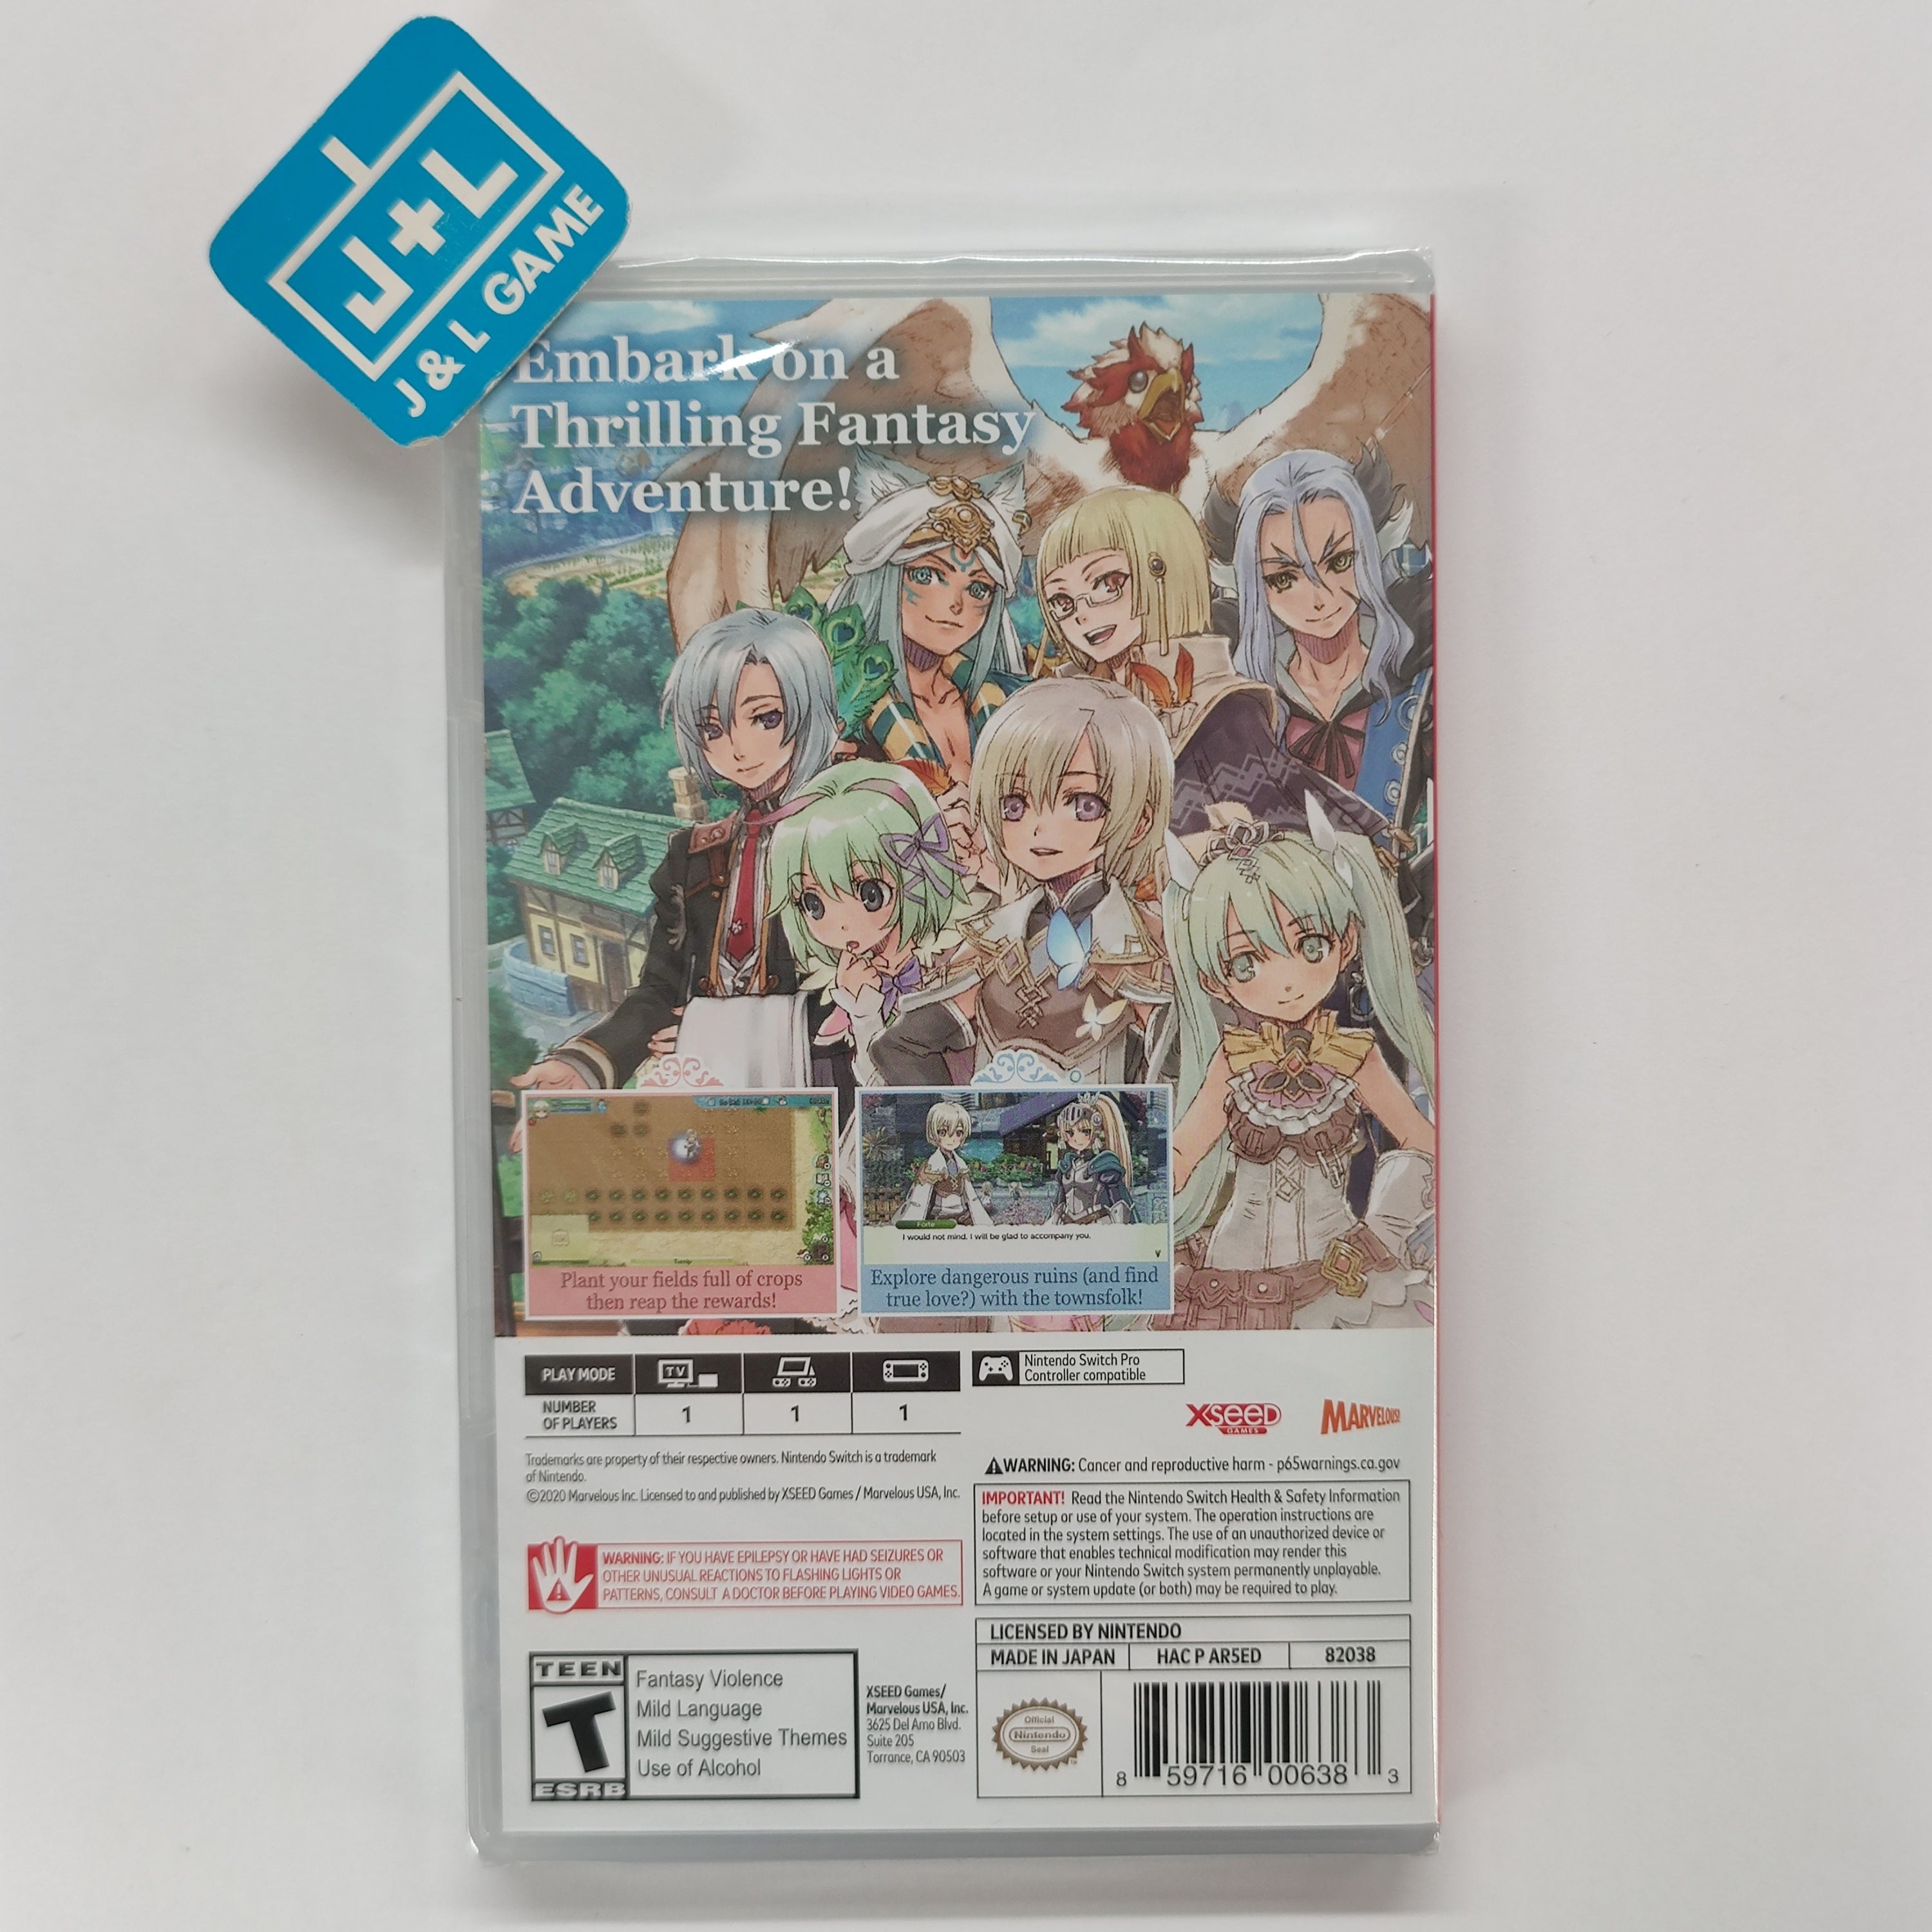 Rune Factory 4 Special - (NSW) Nintendo Switch Video Games XSEED Games   